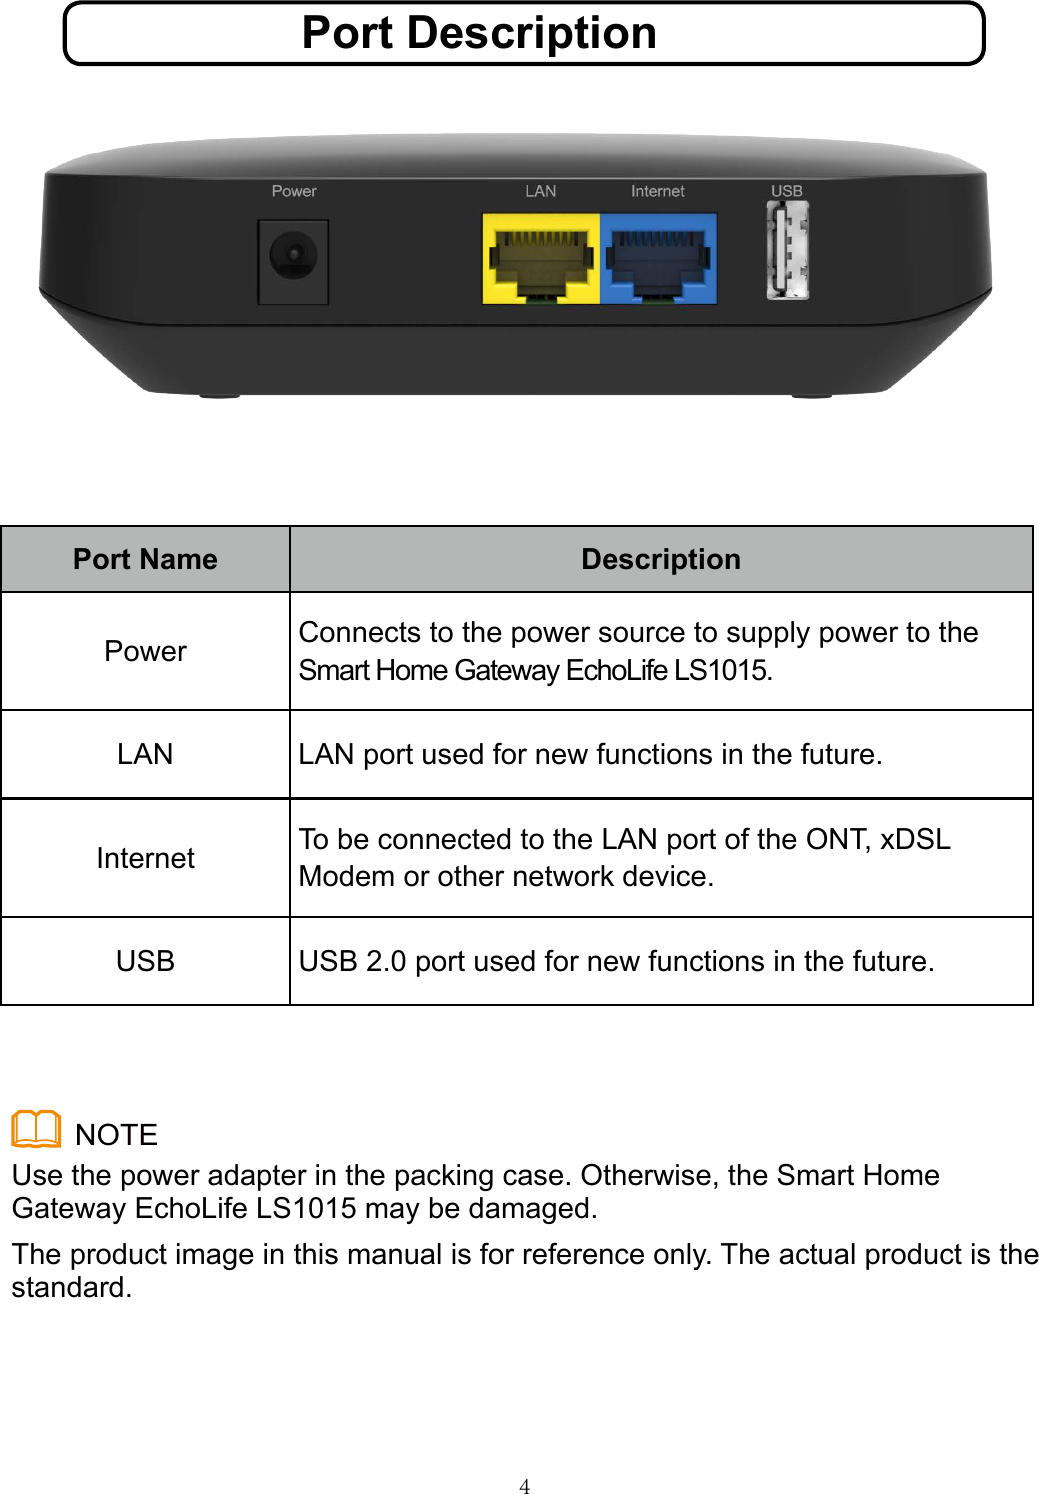 Port Name DescriptionPower Connects to the power source to supply power to the Smart Home Gateway EchoLife LS1015. LAN LAN port used for new functions in the future.Internet To be connected to the LAN port of the ONT, xDSL Modem or other network device.USB USB 2.0 port used for new functions in the future.Use the power adapter in the packing case. Otherwise, the Smart Home  Gateway EchoLife LS1015 may be damaged. The product image in this manual is for reference only. The actual product is the standard. 4NOTEPort Description